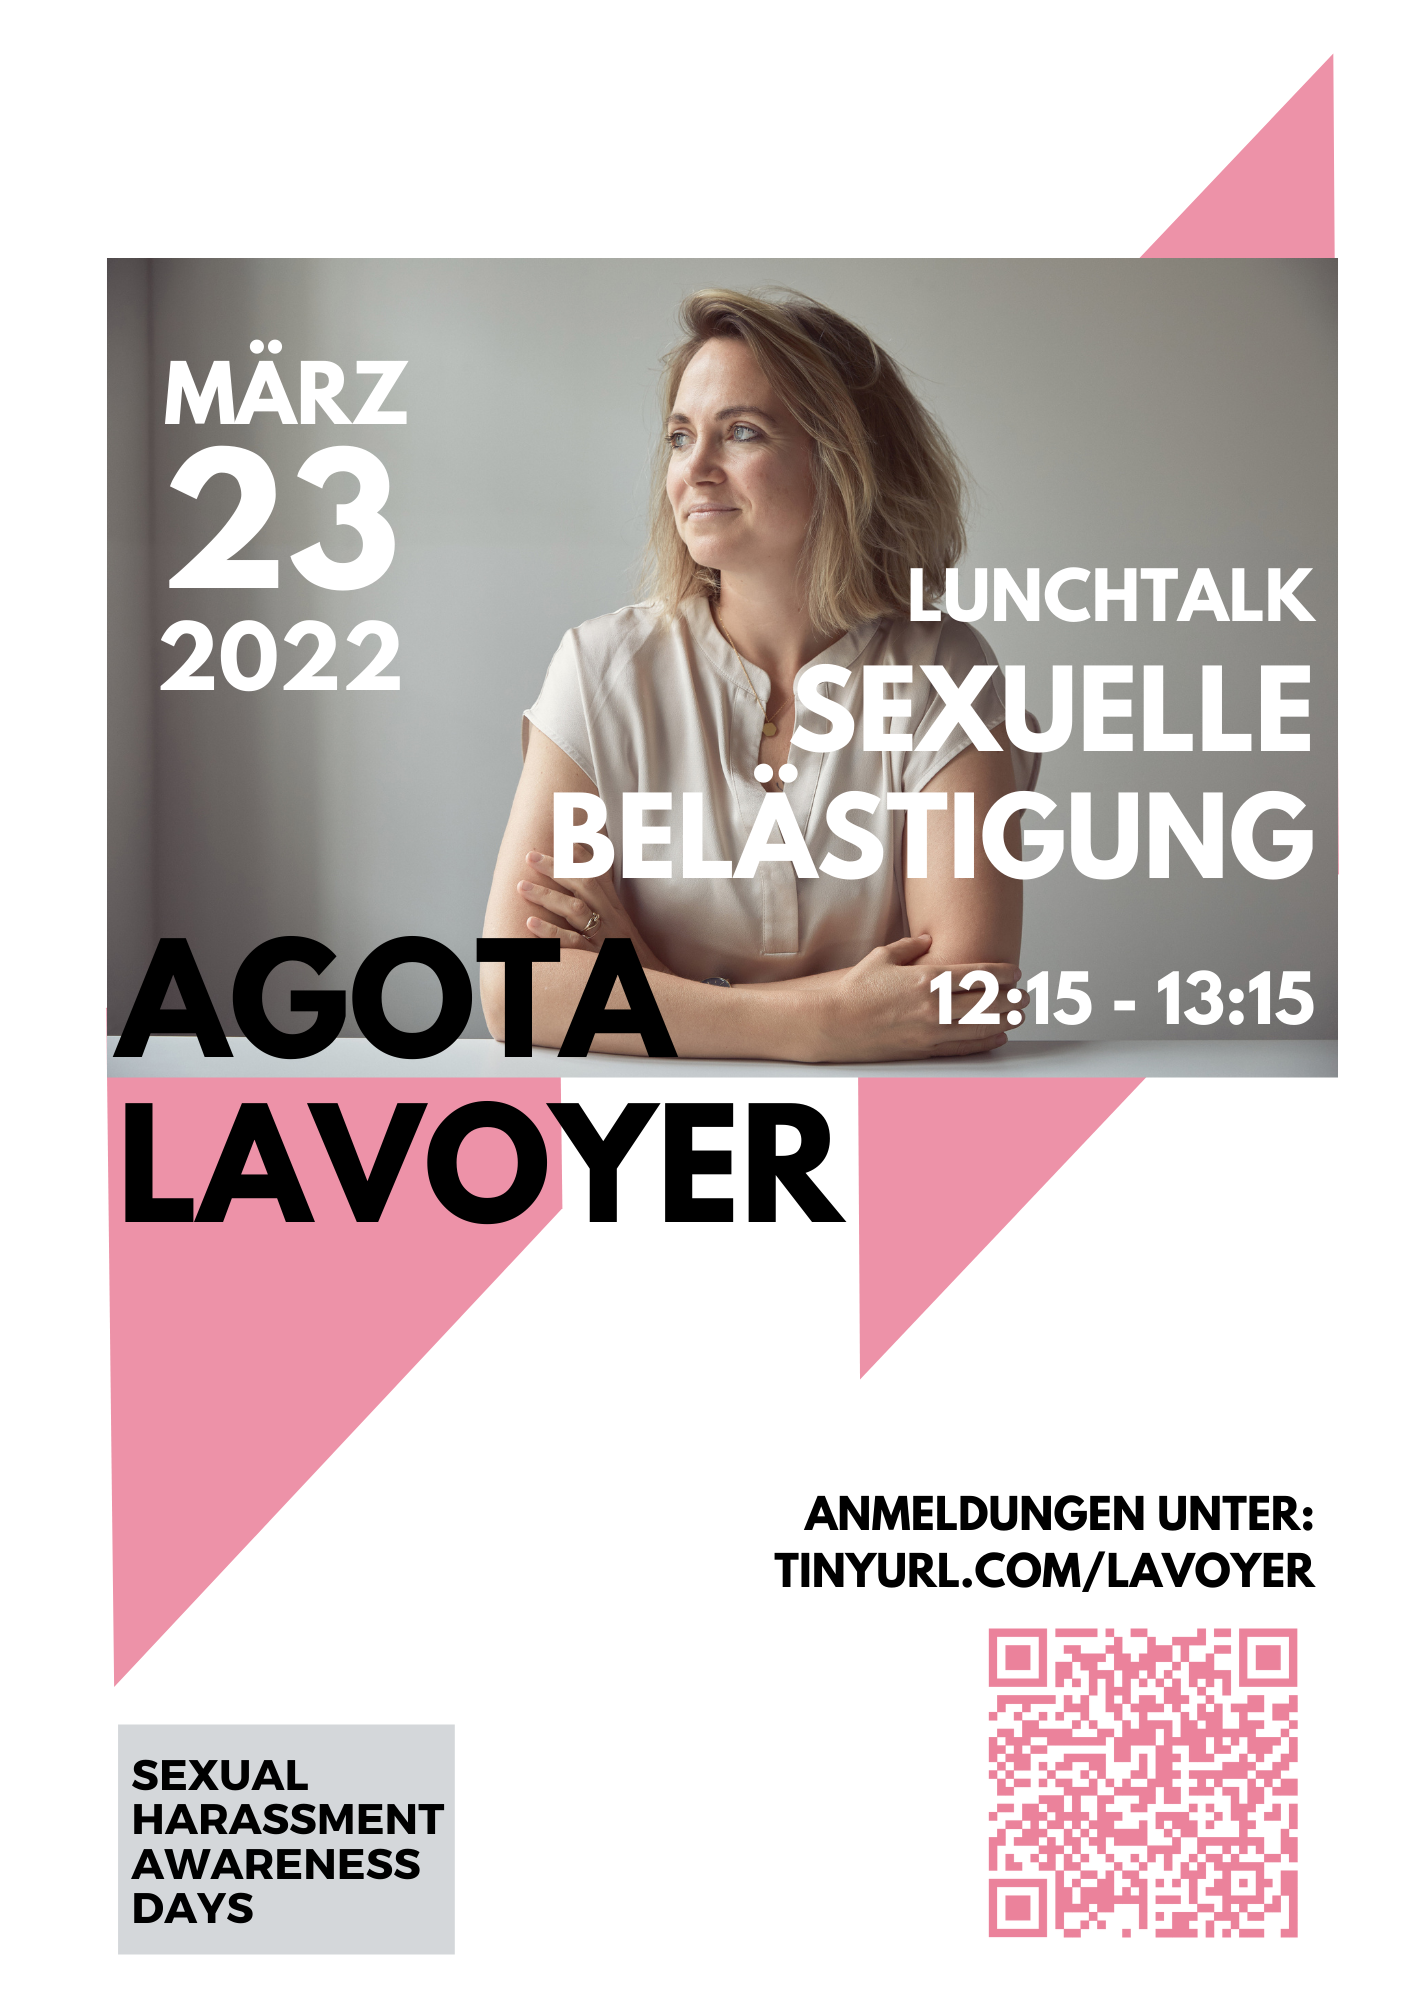 Flyer Lunchtalk: 23. March. With Agota Lavoyer.